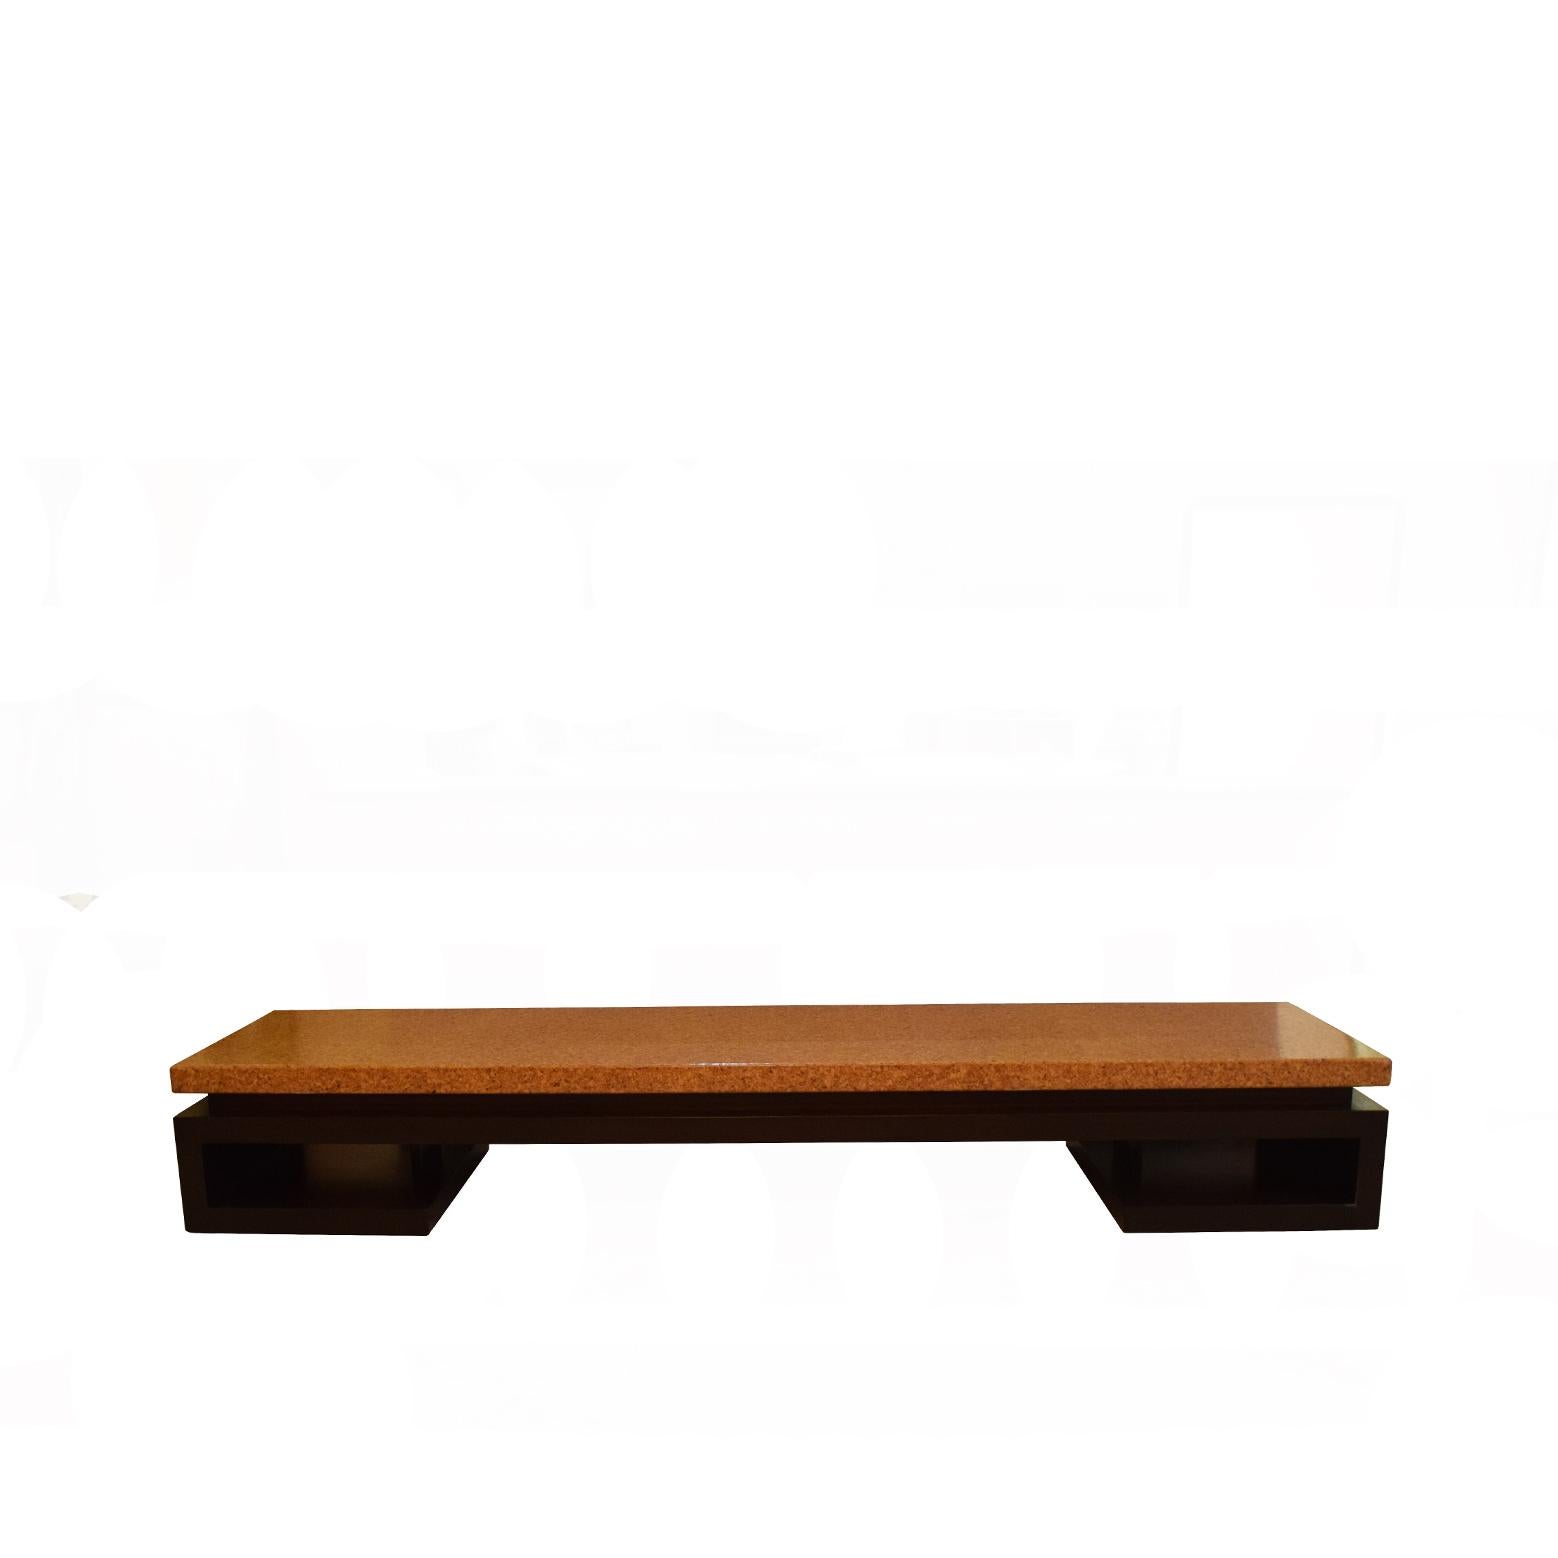 Paul Frankl low cork table / bench 1940’s manufactured by Johnson Furniture Co. fully restored.